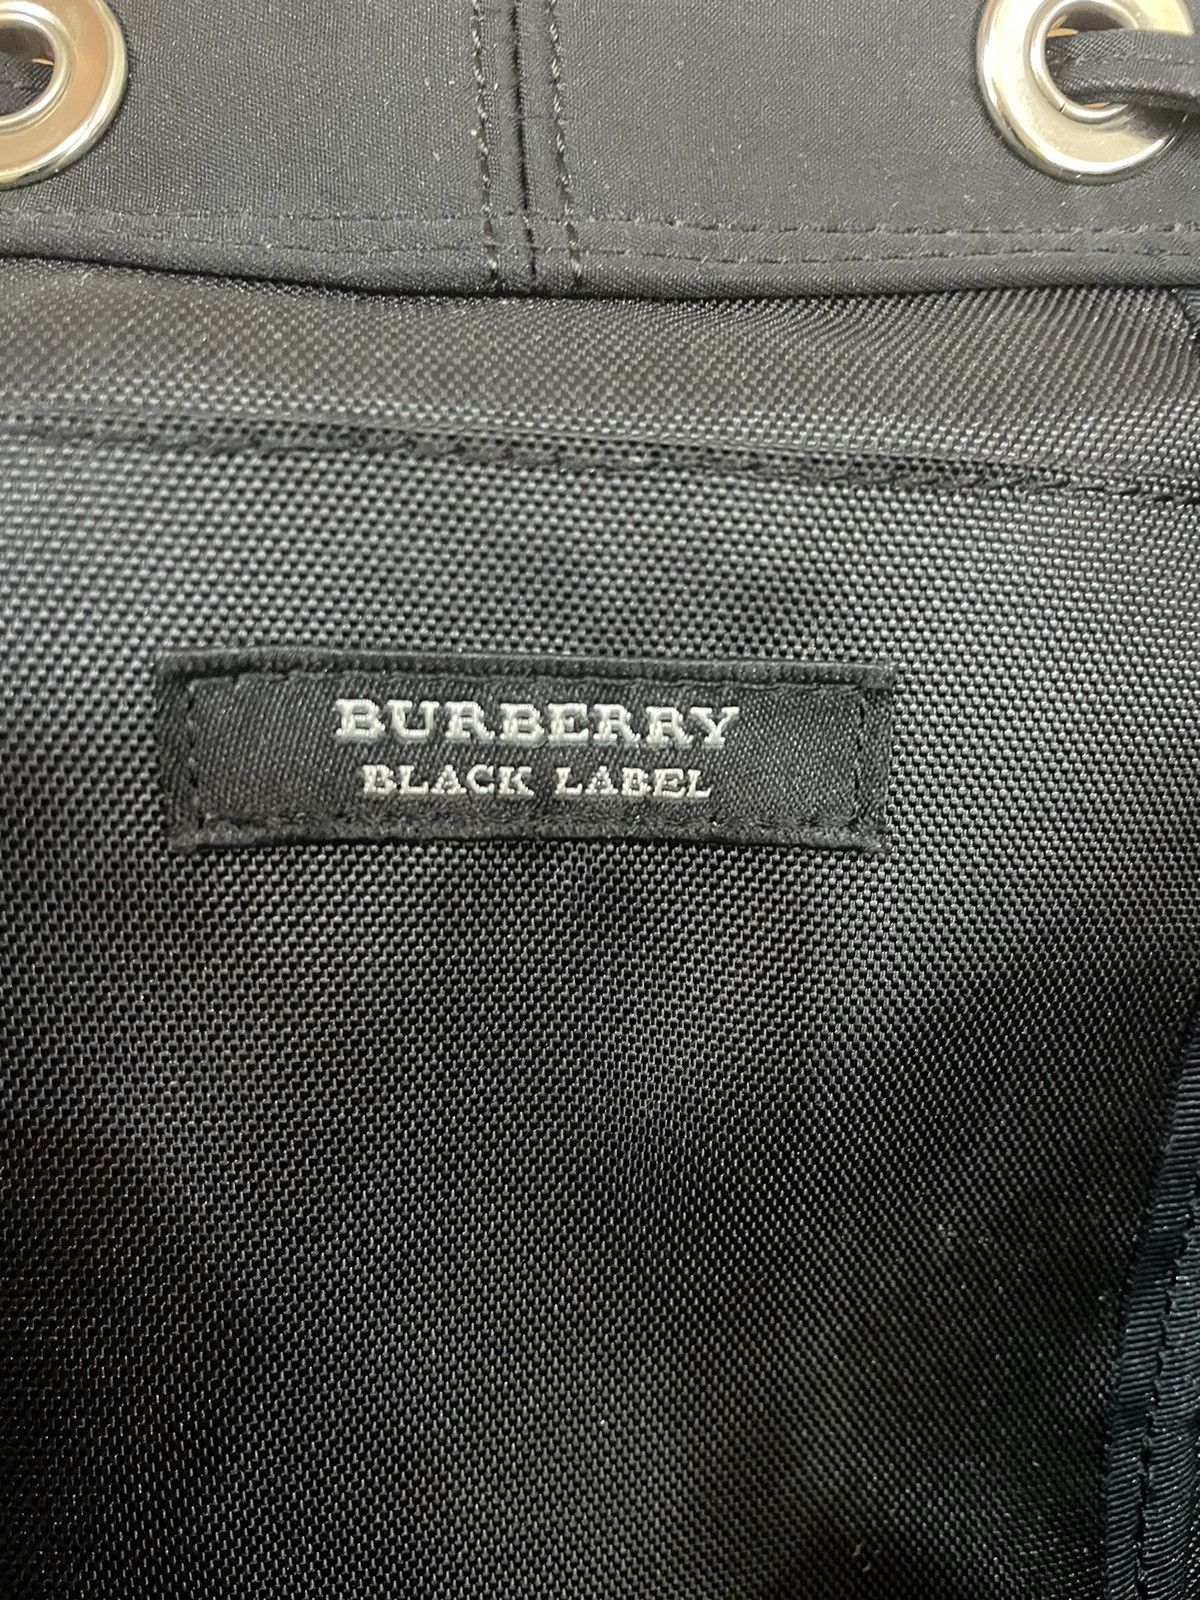 Authentic BURBERRY Backpack Black Label - 19